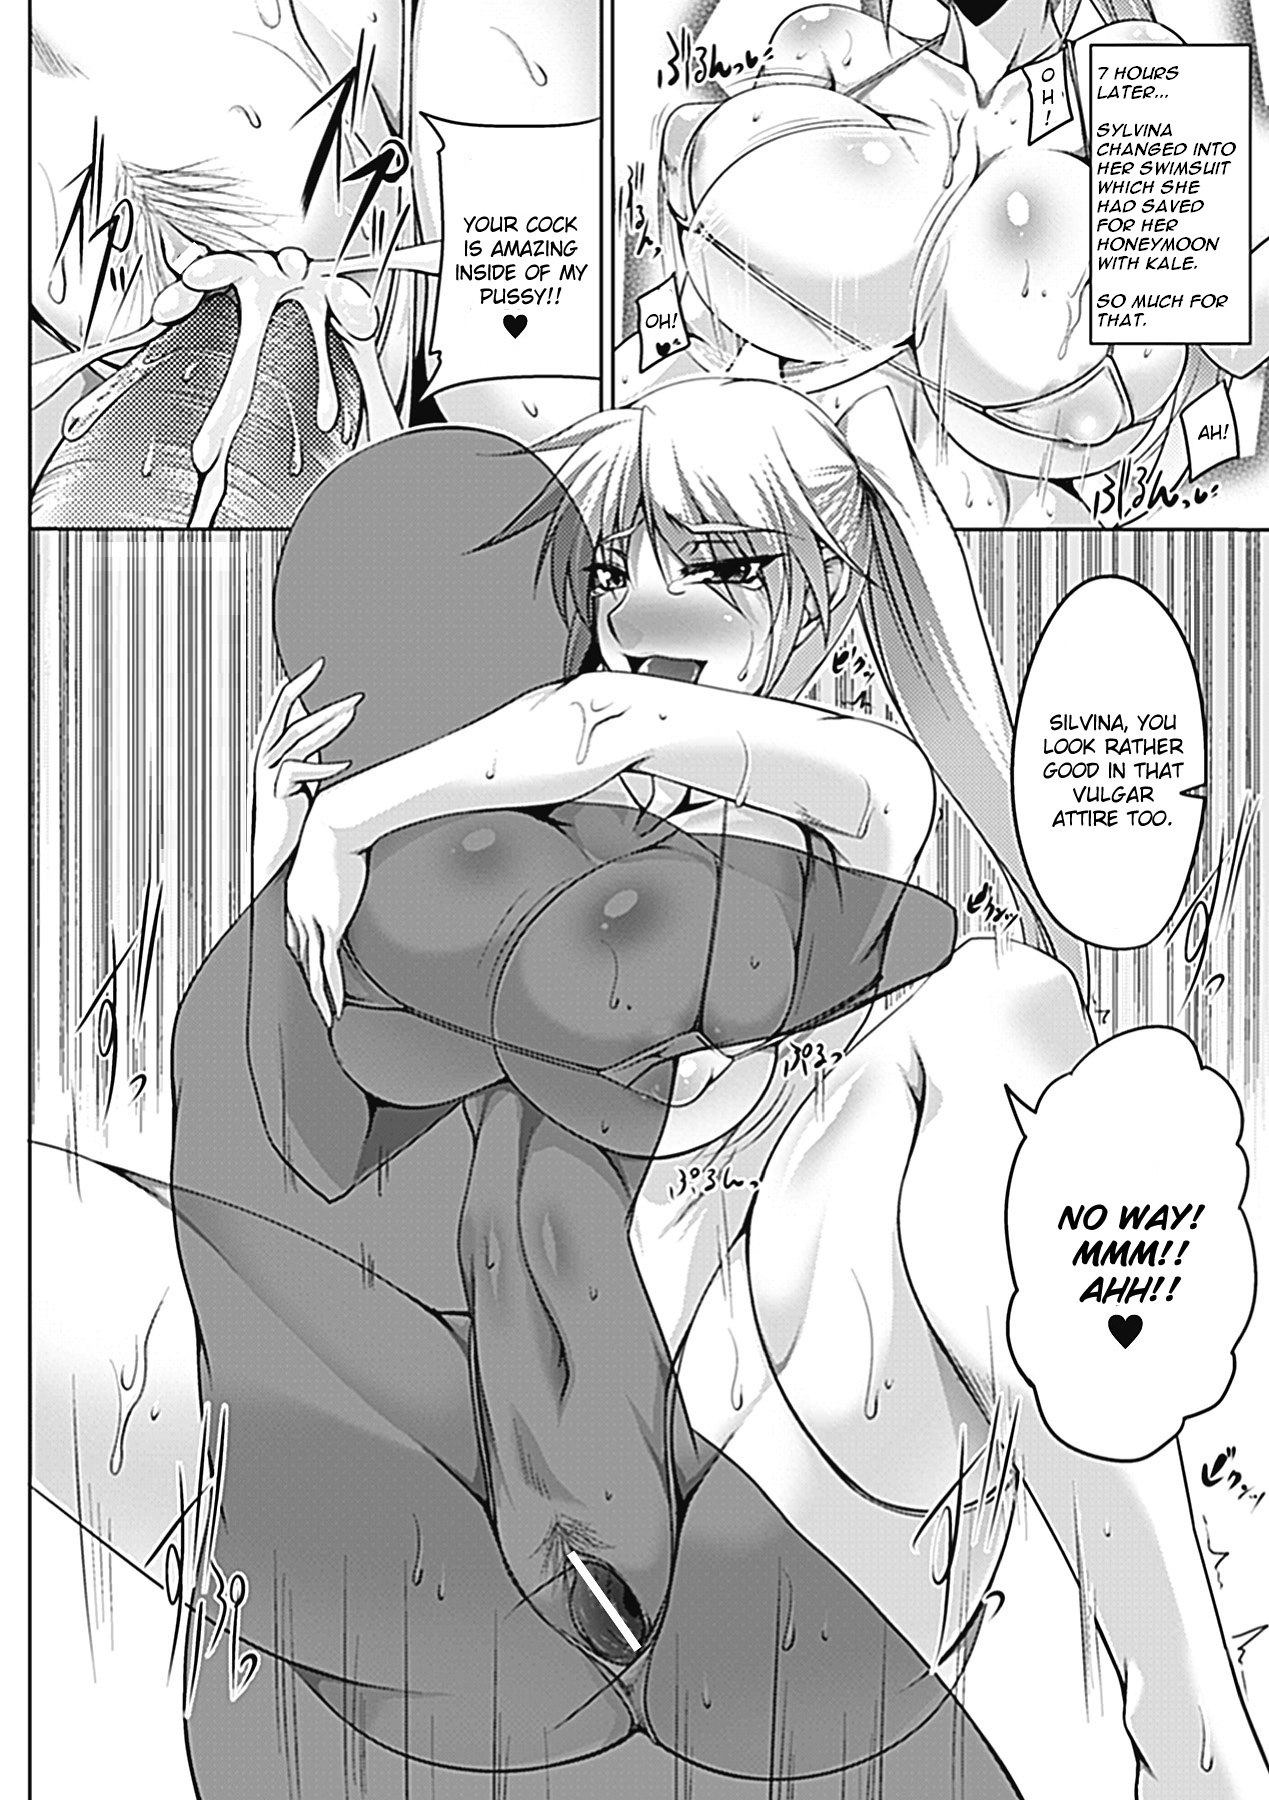 Stolen Military Princess [English] [Rewrite] page 19 full